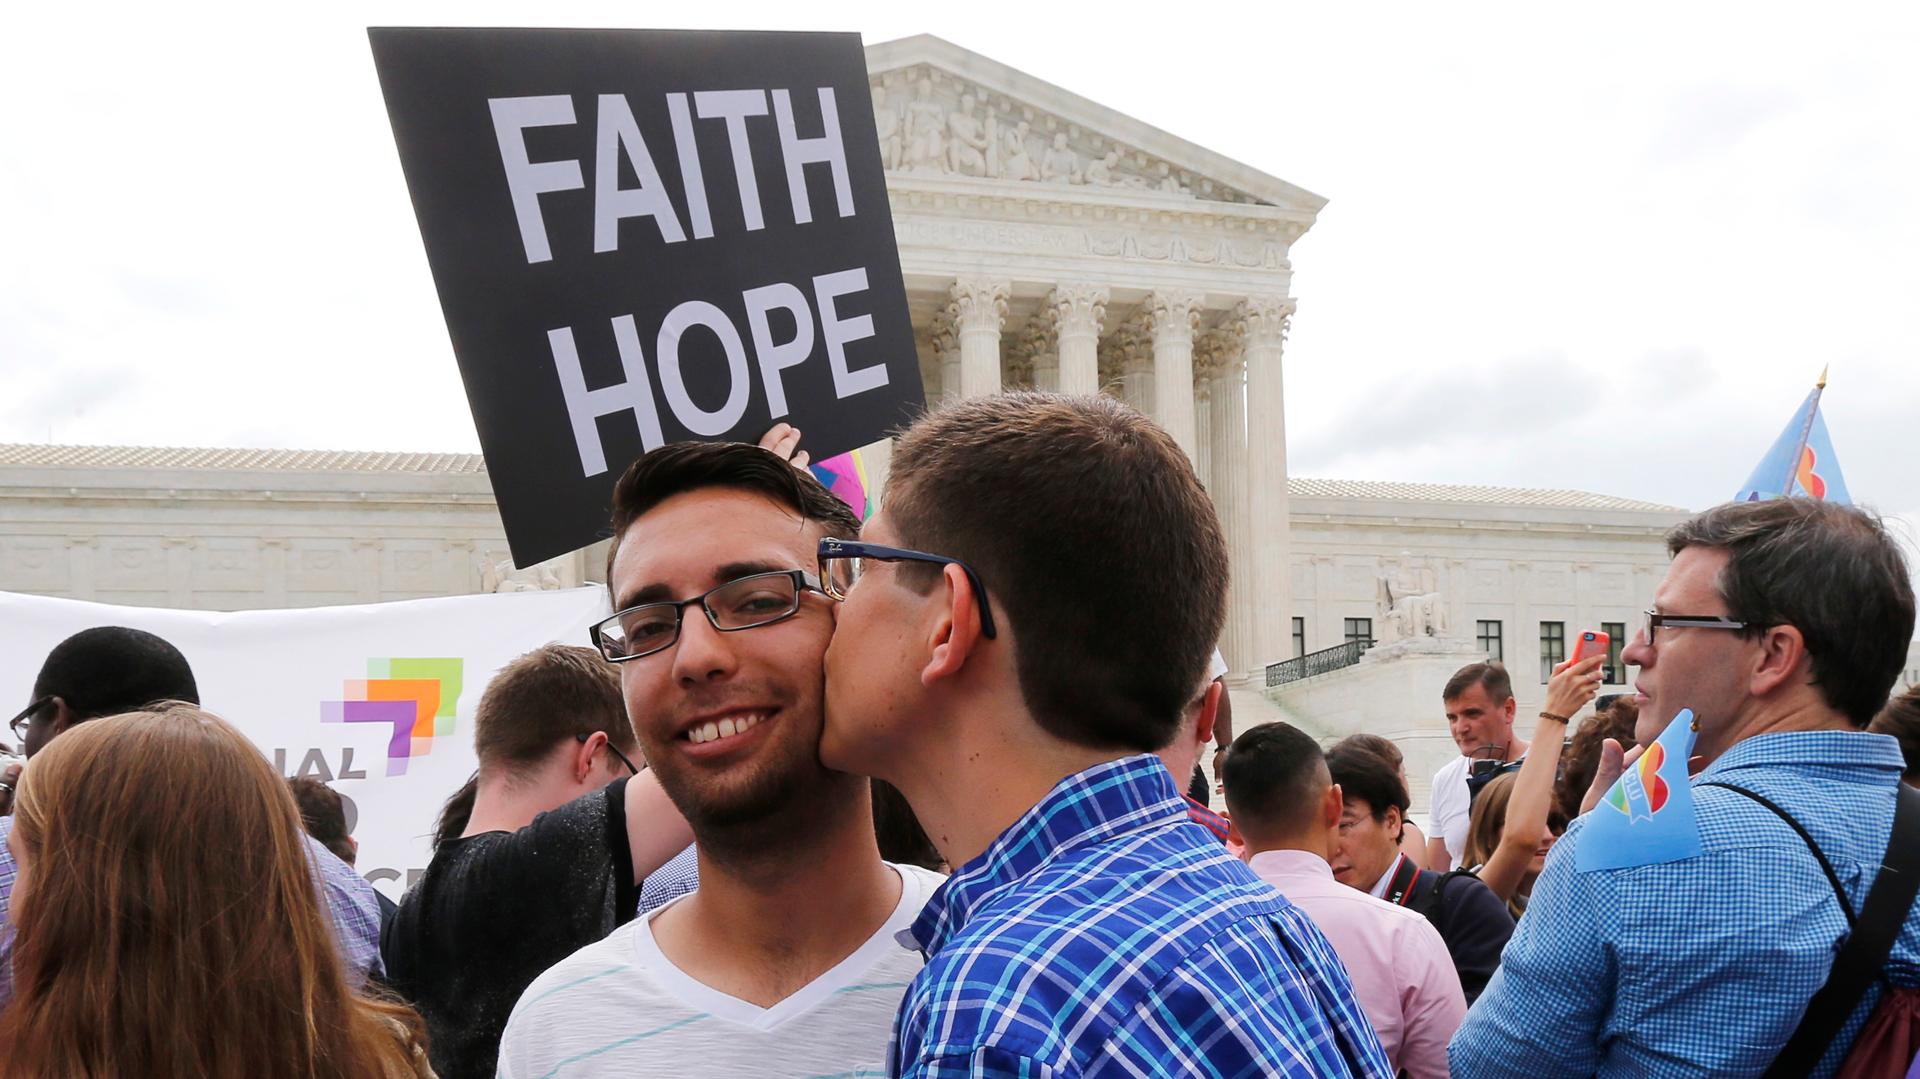 Gay rights supporters celebrate outside the Supreme Court building in Washington on June 26, 2015. The court ruled 5-4 that the Constitution's guarantees of due process and equal protection under the law mean that states cannot ban same-sex marriages.